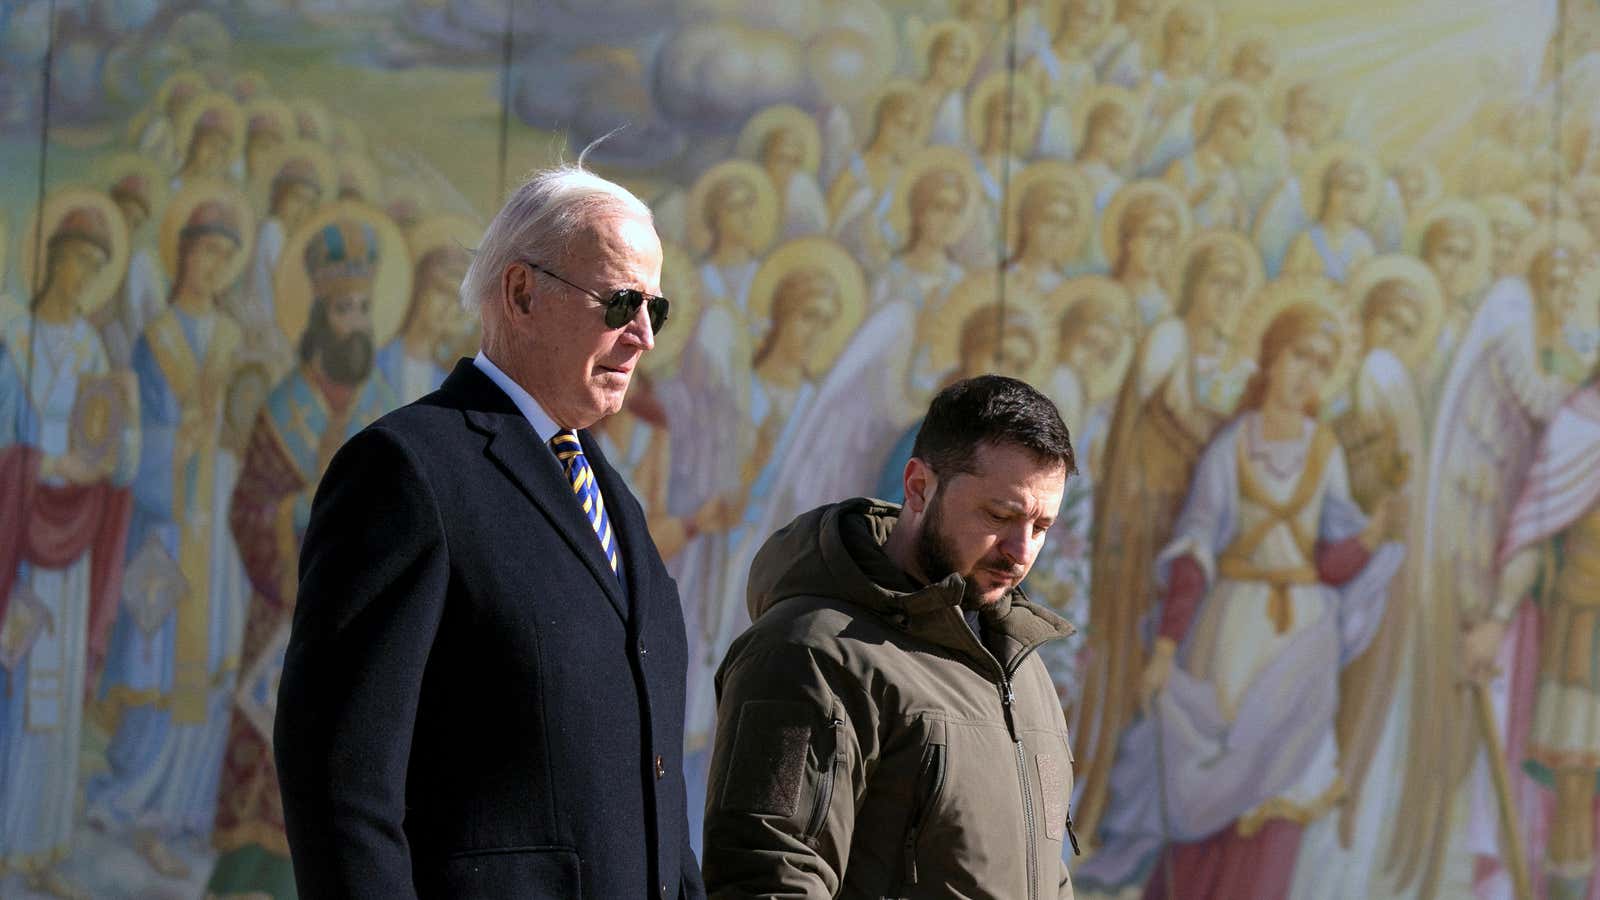 Biden made a surprise visit to Ukraine on Monday (Feb 20), traveling from Poland by train to meet with Zelenskyy.